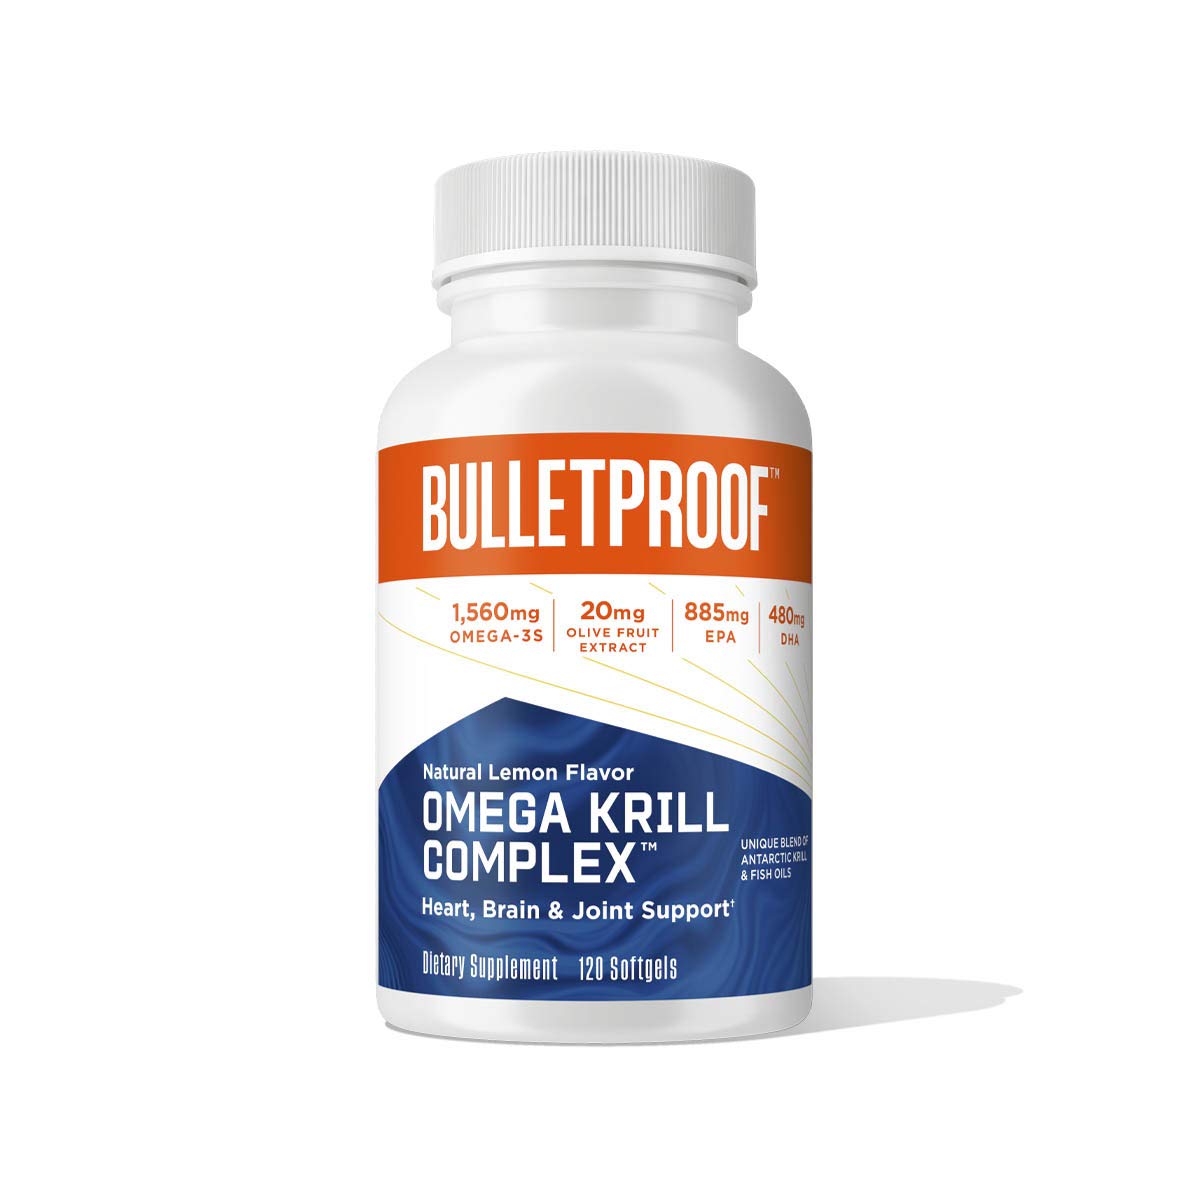 Book Cover Bulletproof Omega Krill Complex, Lemon Flavor, 120 Softgels, 1560mg Omega-3 with EPA, DHA, GLA, and Astaxanthin, Keto Fish Oil Supplement for Brain and Heart Health